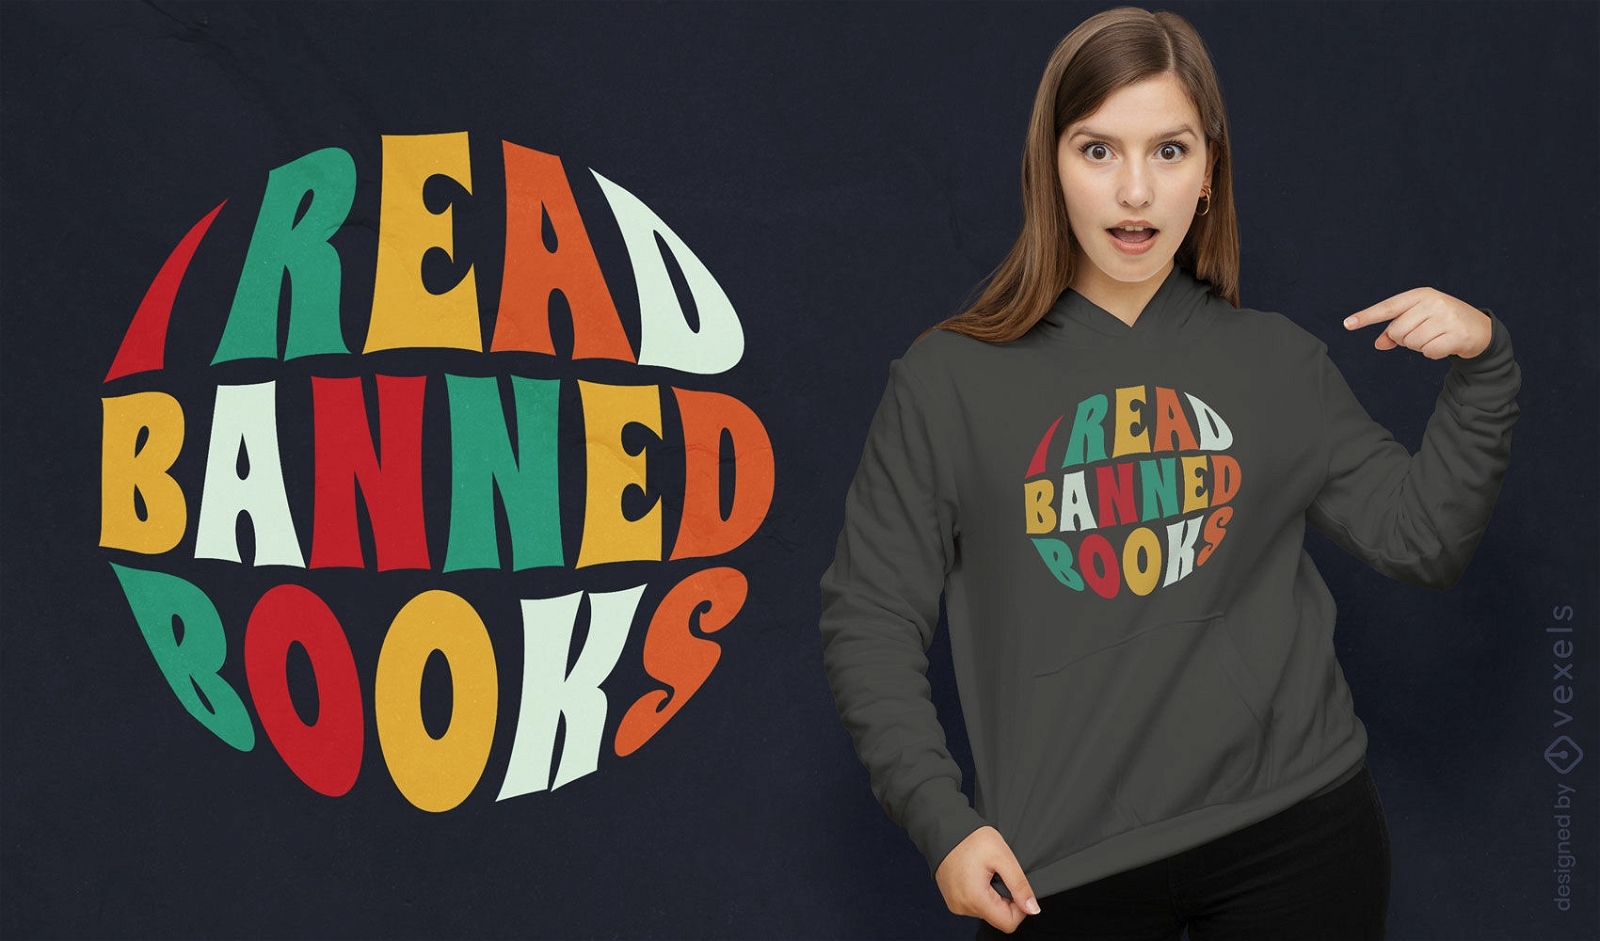 Reading books hobby quote t-shirt design